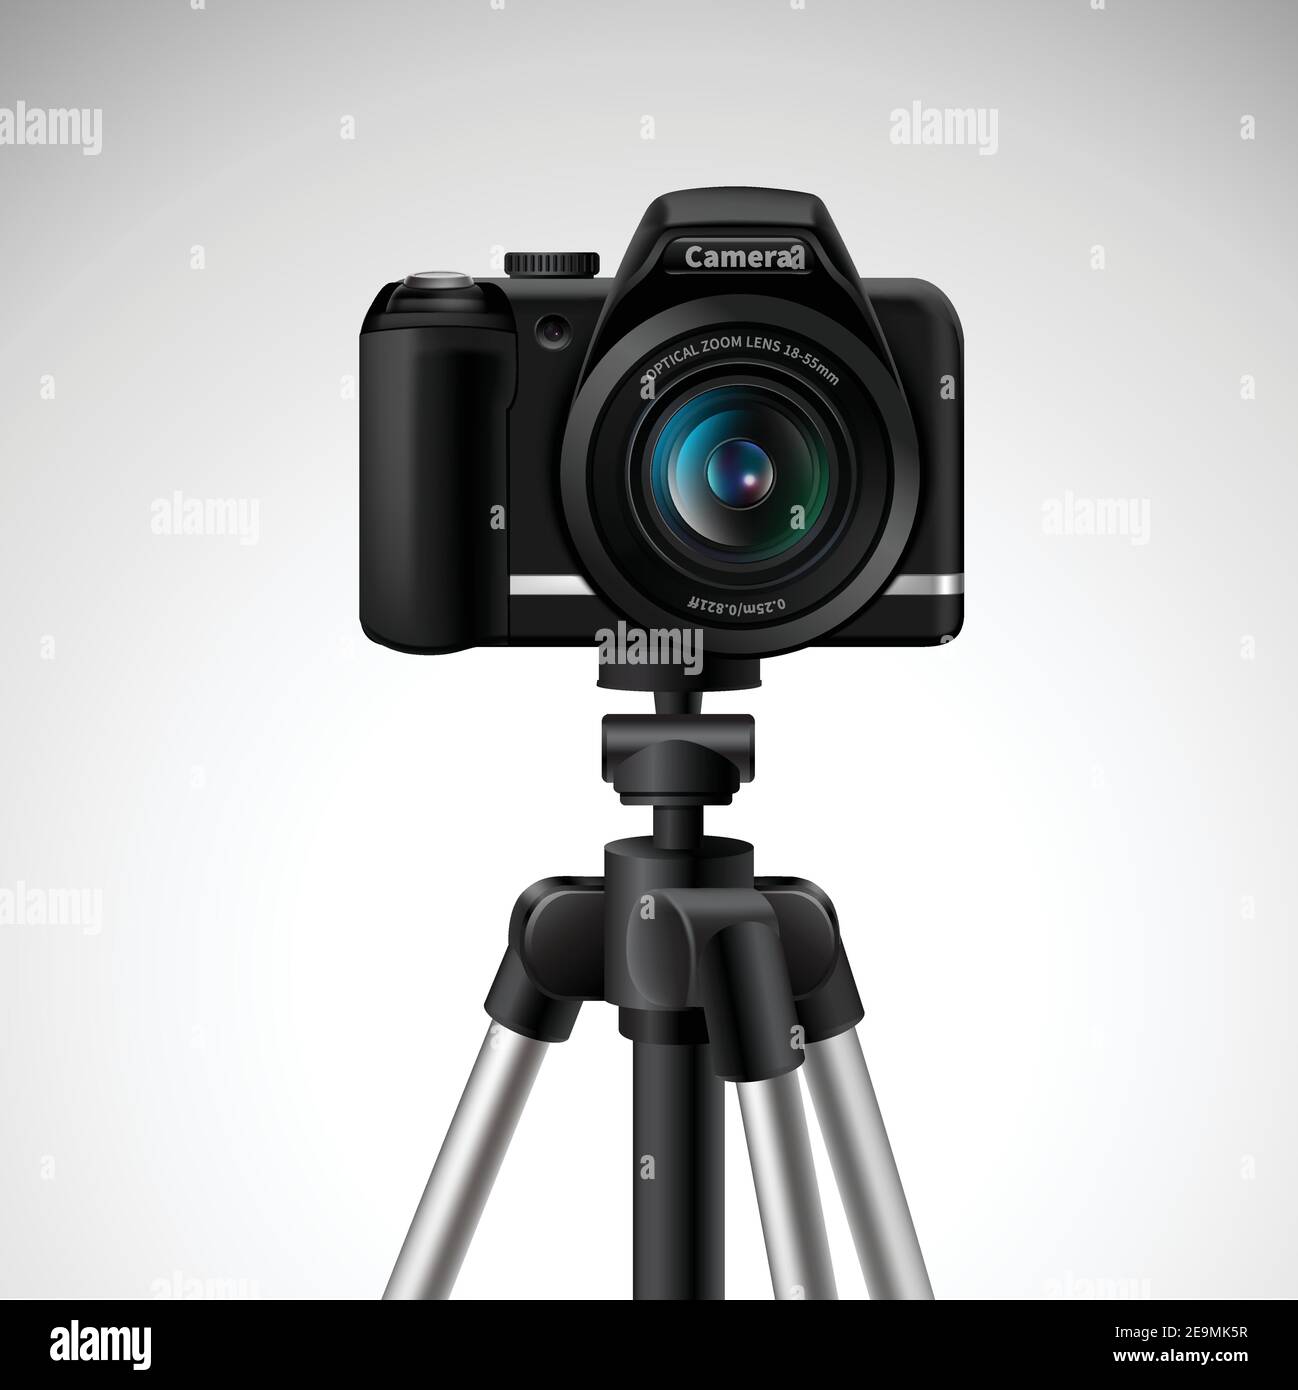 Realistic digital photo camera on tripod isolated on white background vector illustration Stock Vector